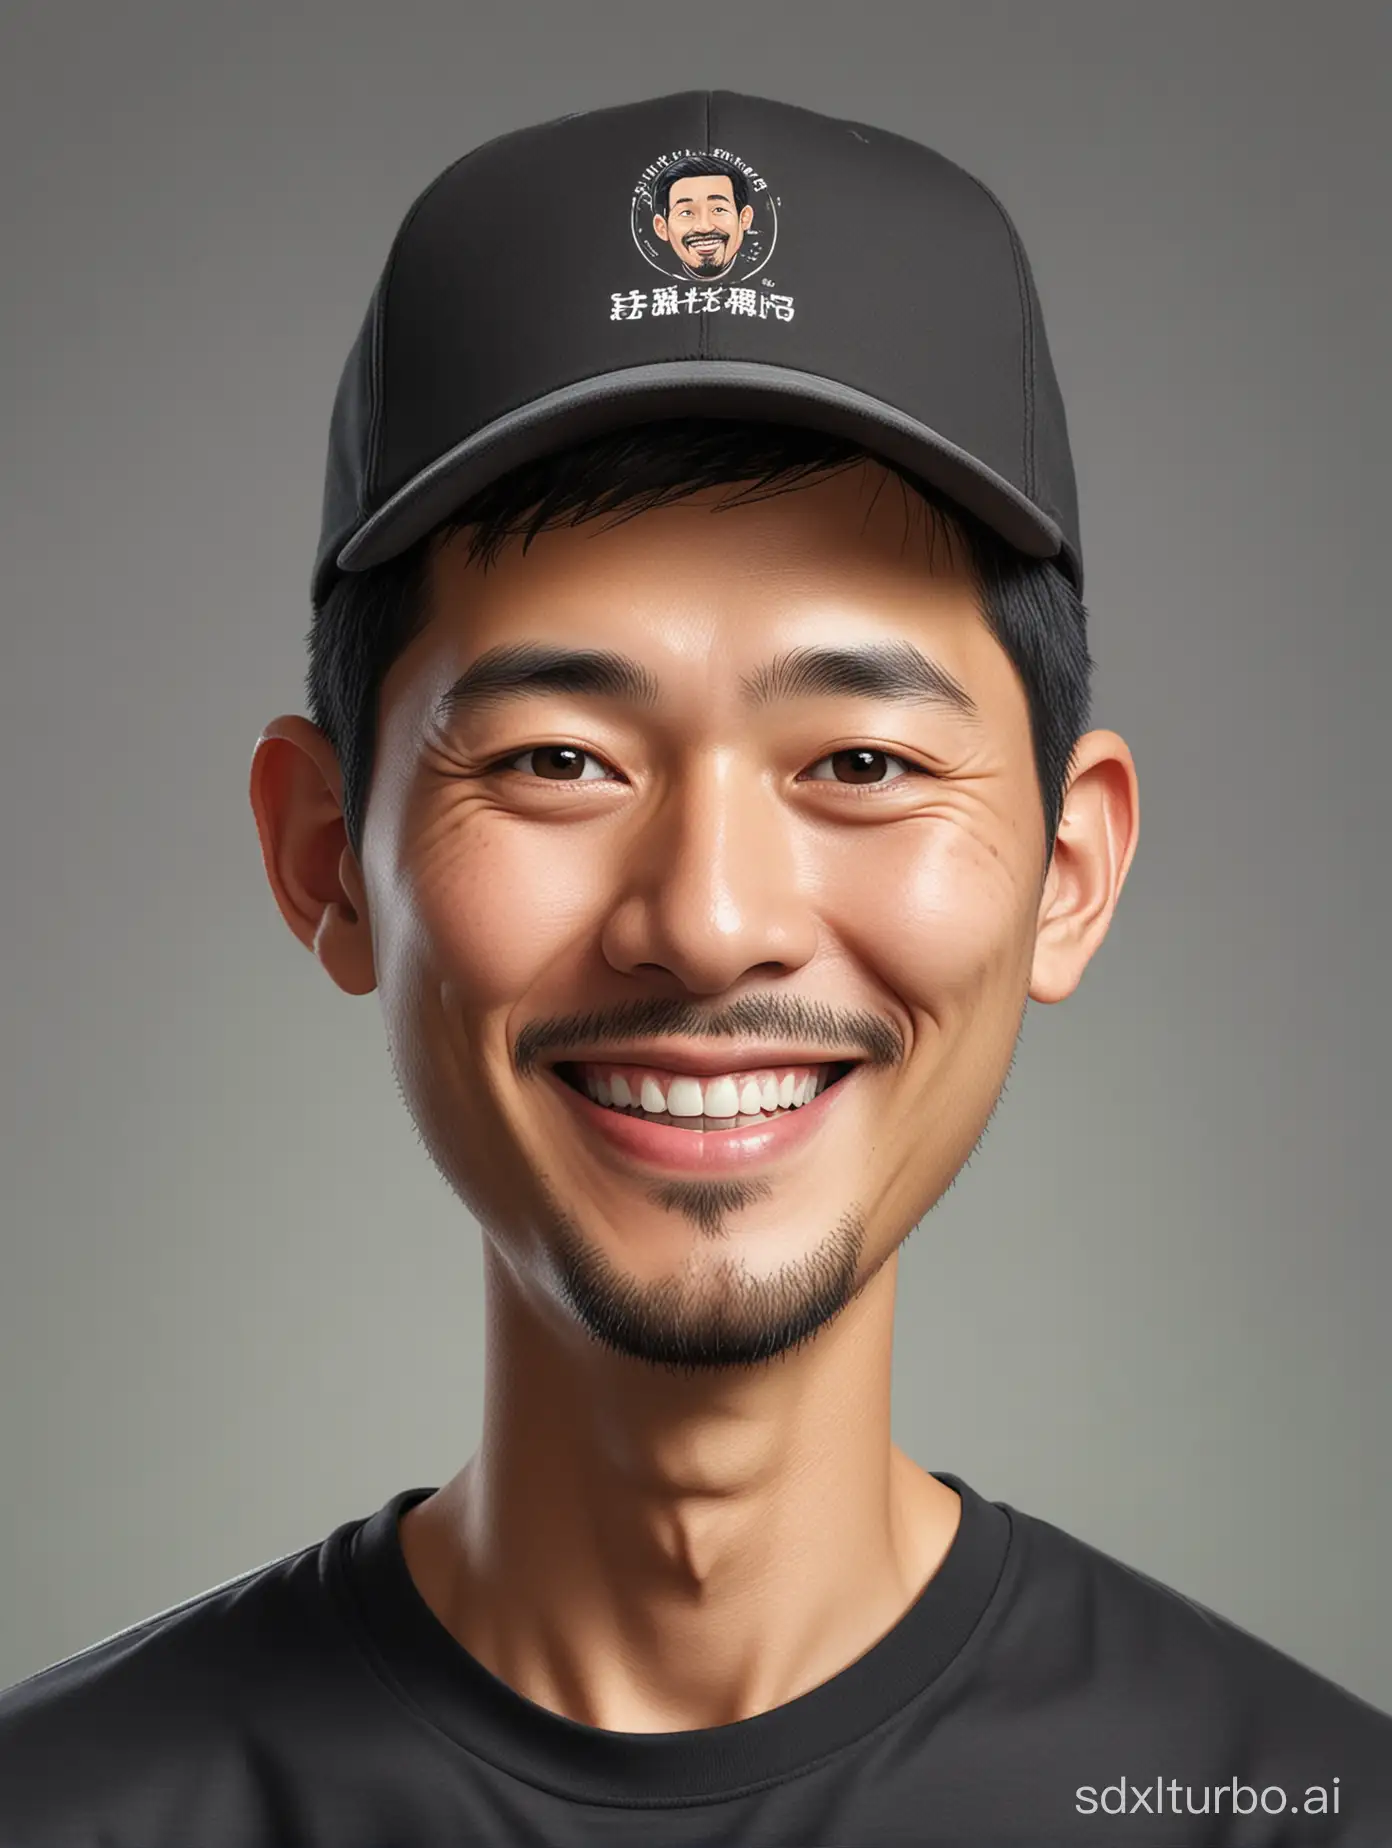 Cheerful-Chinese-Man-in-Black-Hat-and-TShirt-Portrait